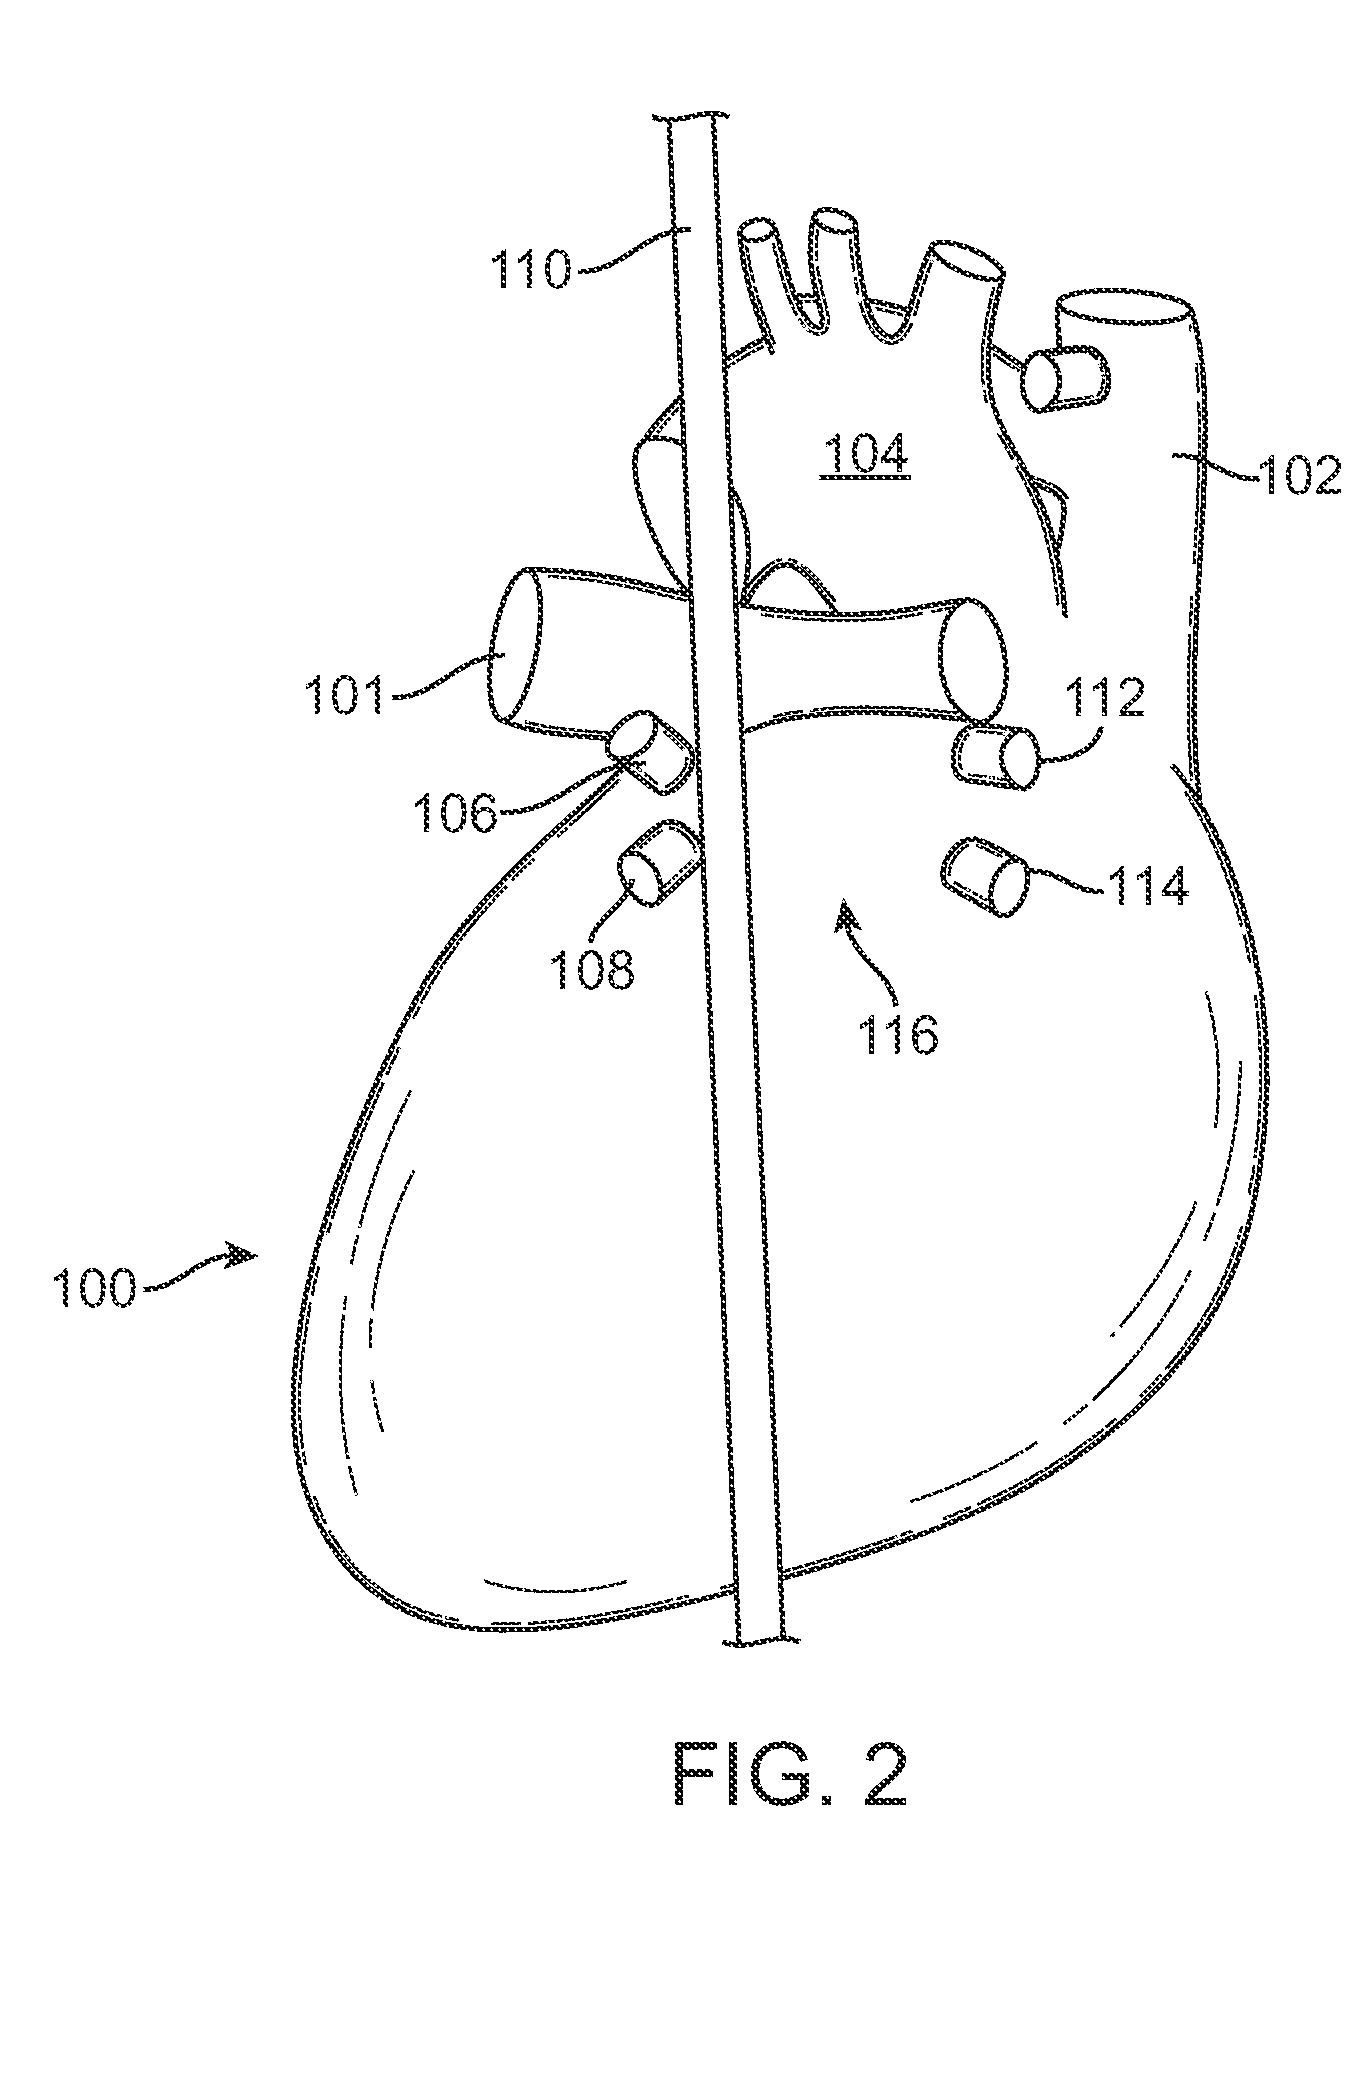 Method to protect the esophagus and other mediastinal structures during cardiac and thoracic interventions